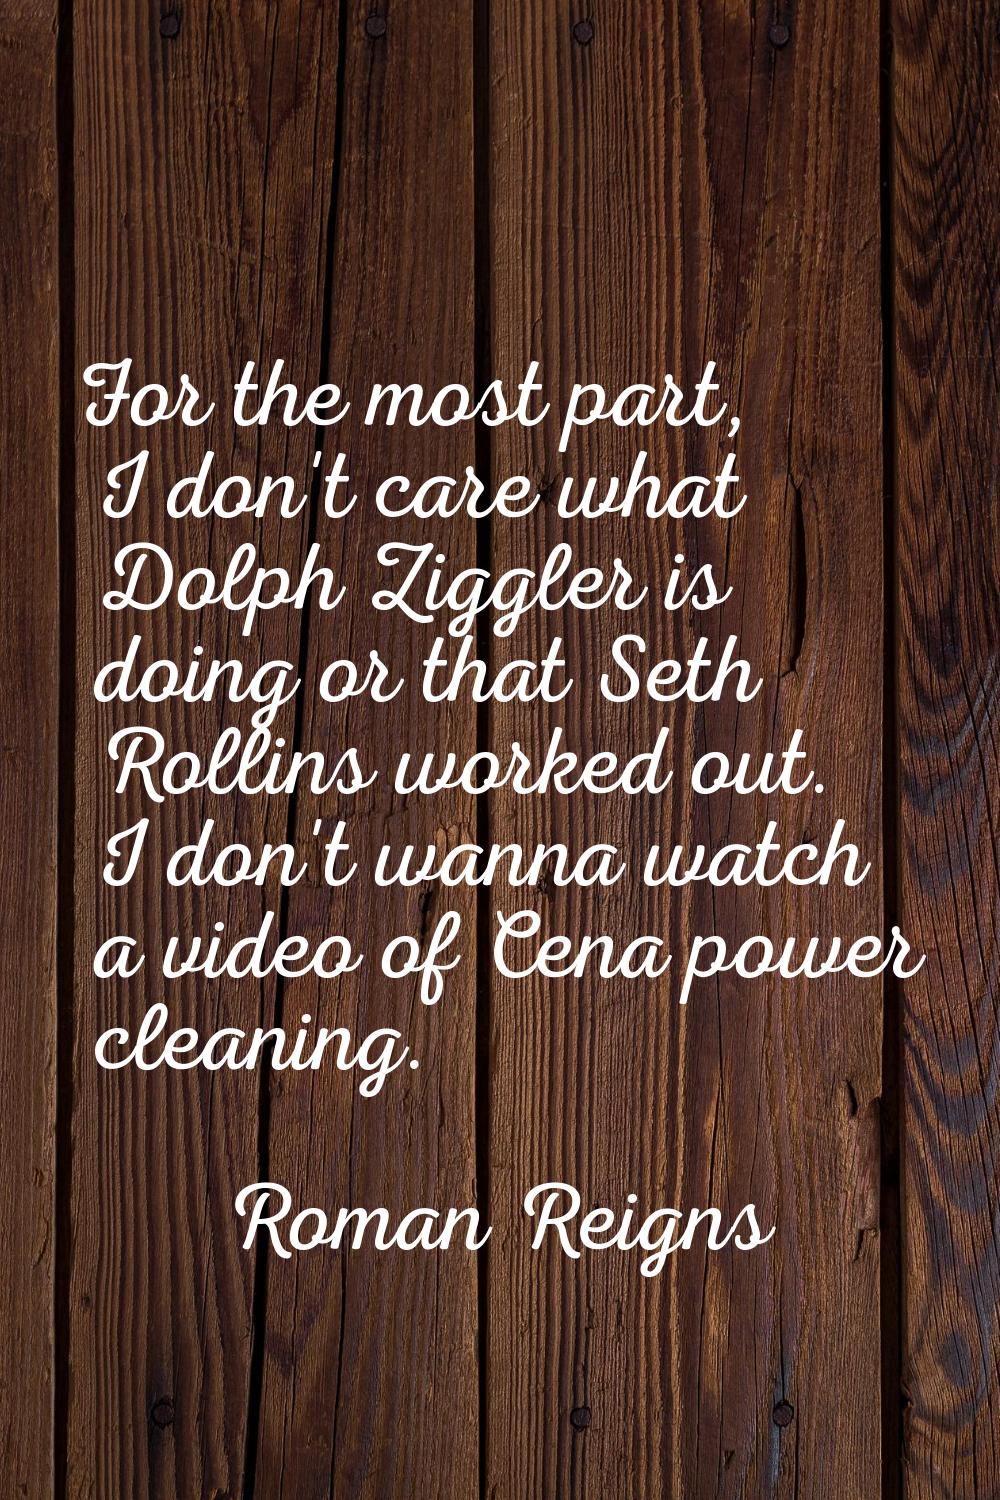 For the most part, I don't care what Dolph Ziggler is doing or that Seth Rollins worked out. I don'